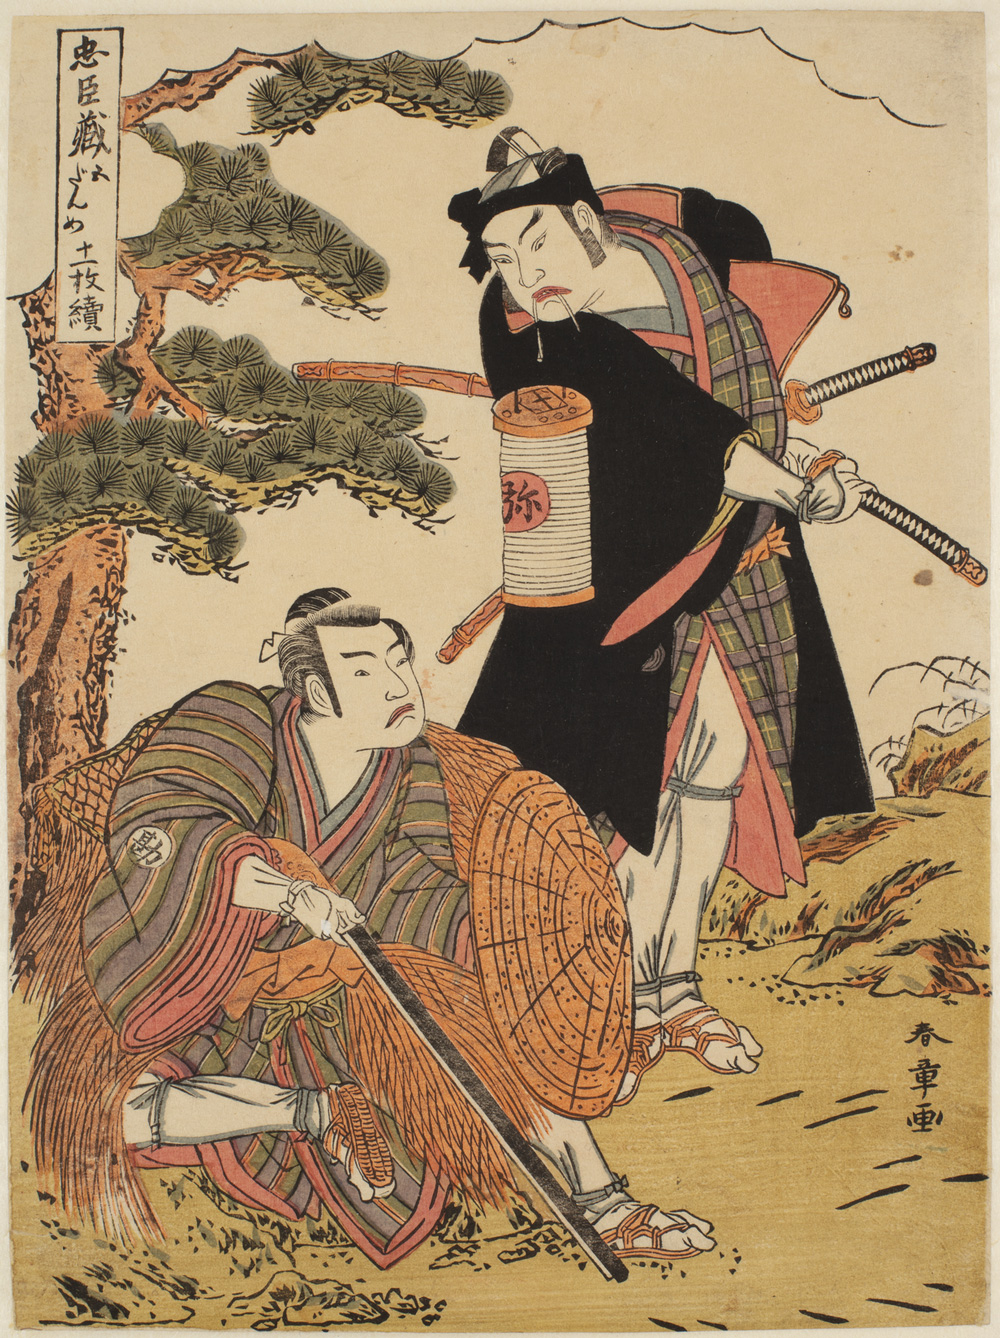 A Japanese print of two men in traditional dress. One is seated, by a tree, holding a stick and a hat. Standing over and looking down at him is another man with his hand on his sword.